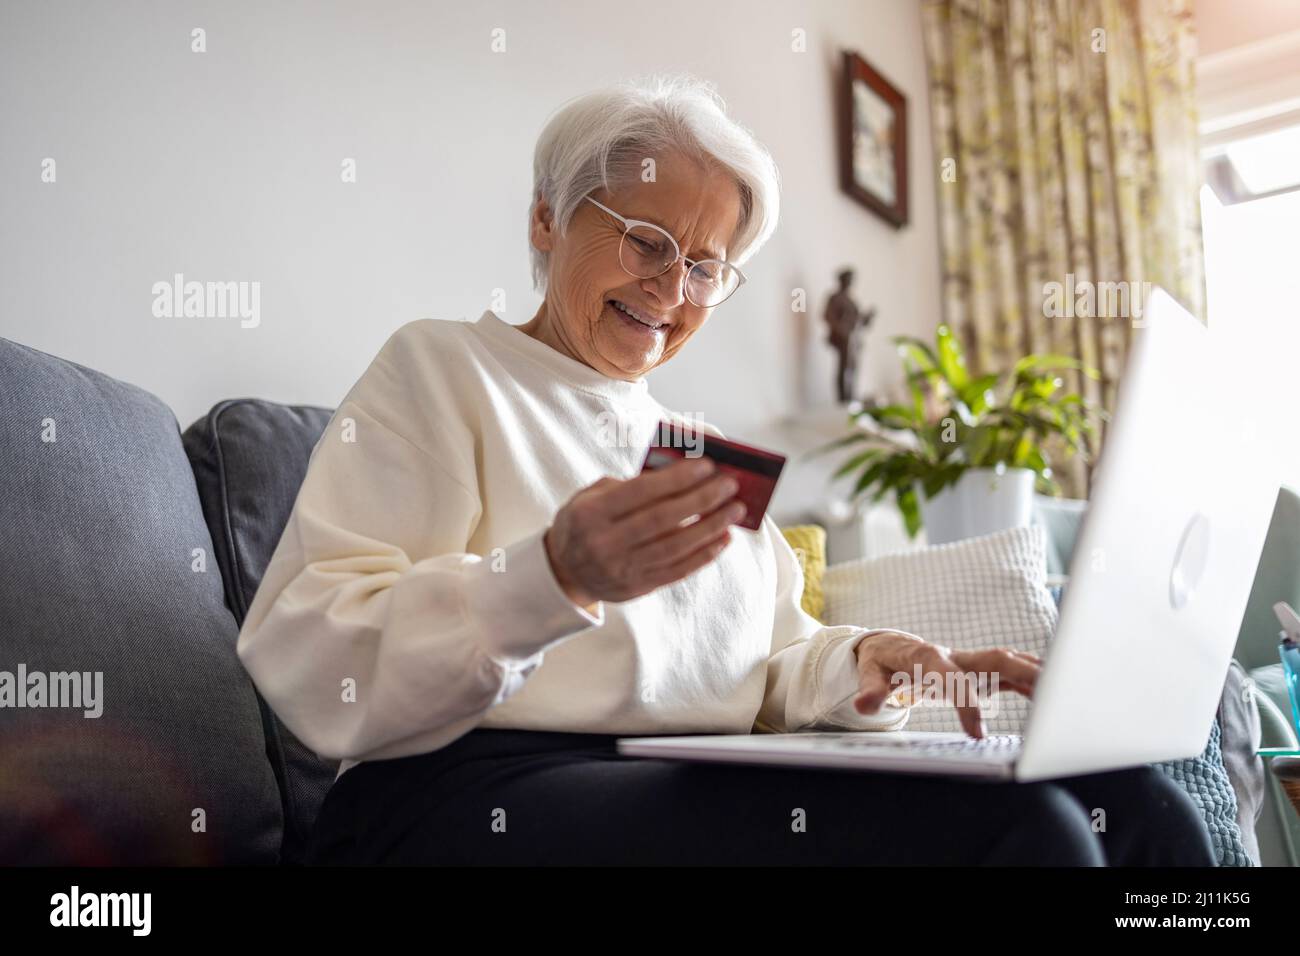 Senior woman doing online shopping on laptop at home Stock Photo